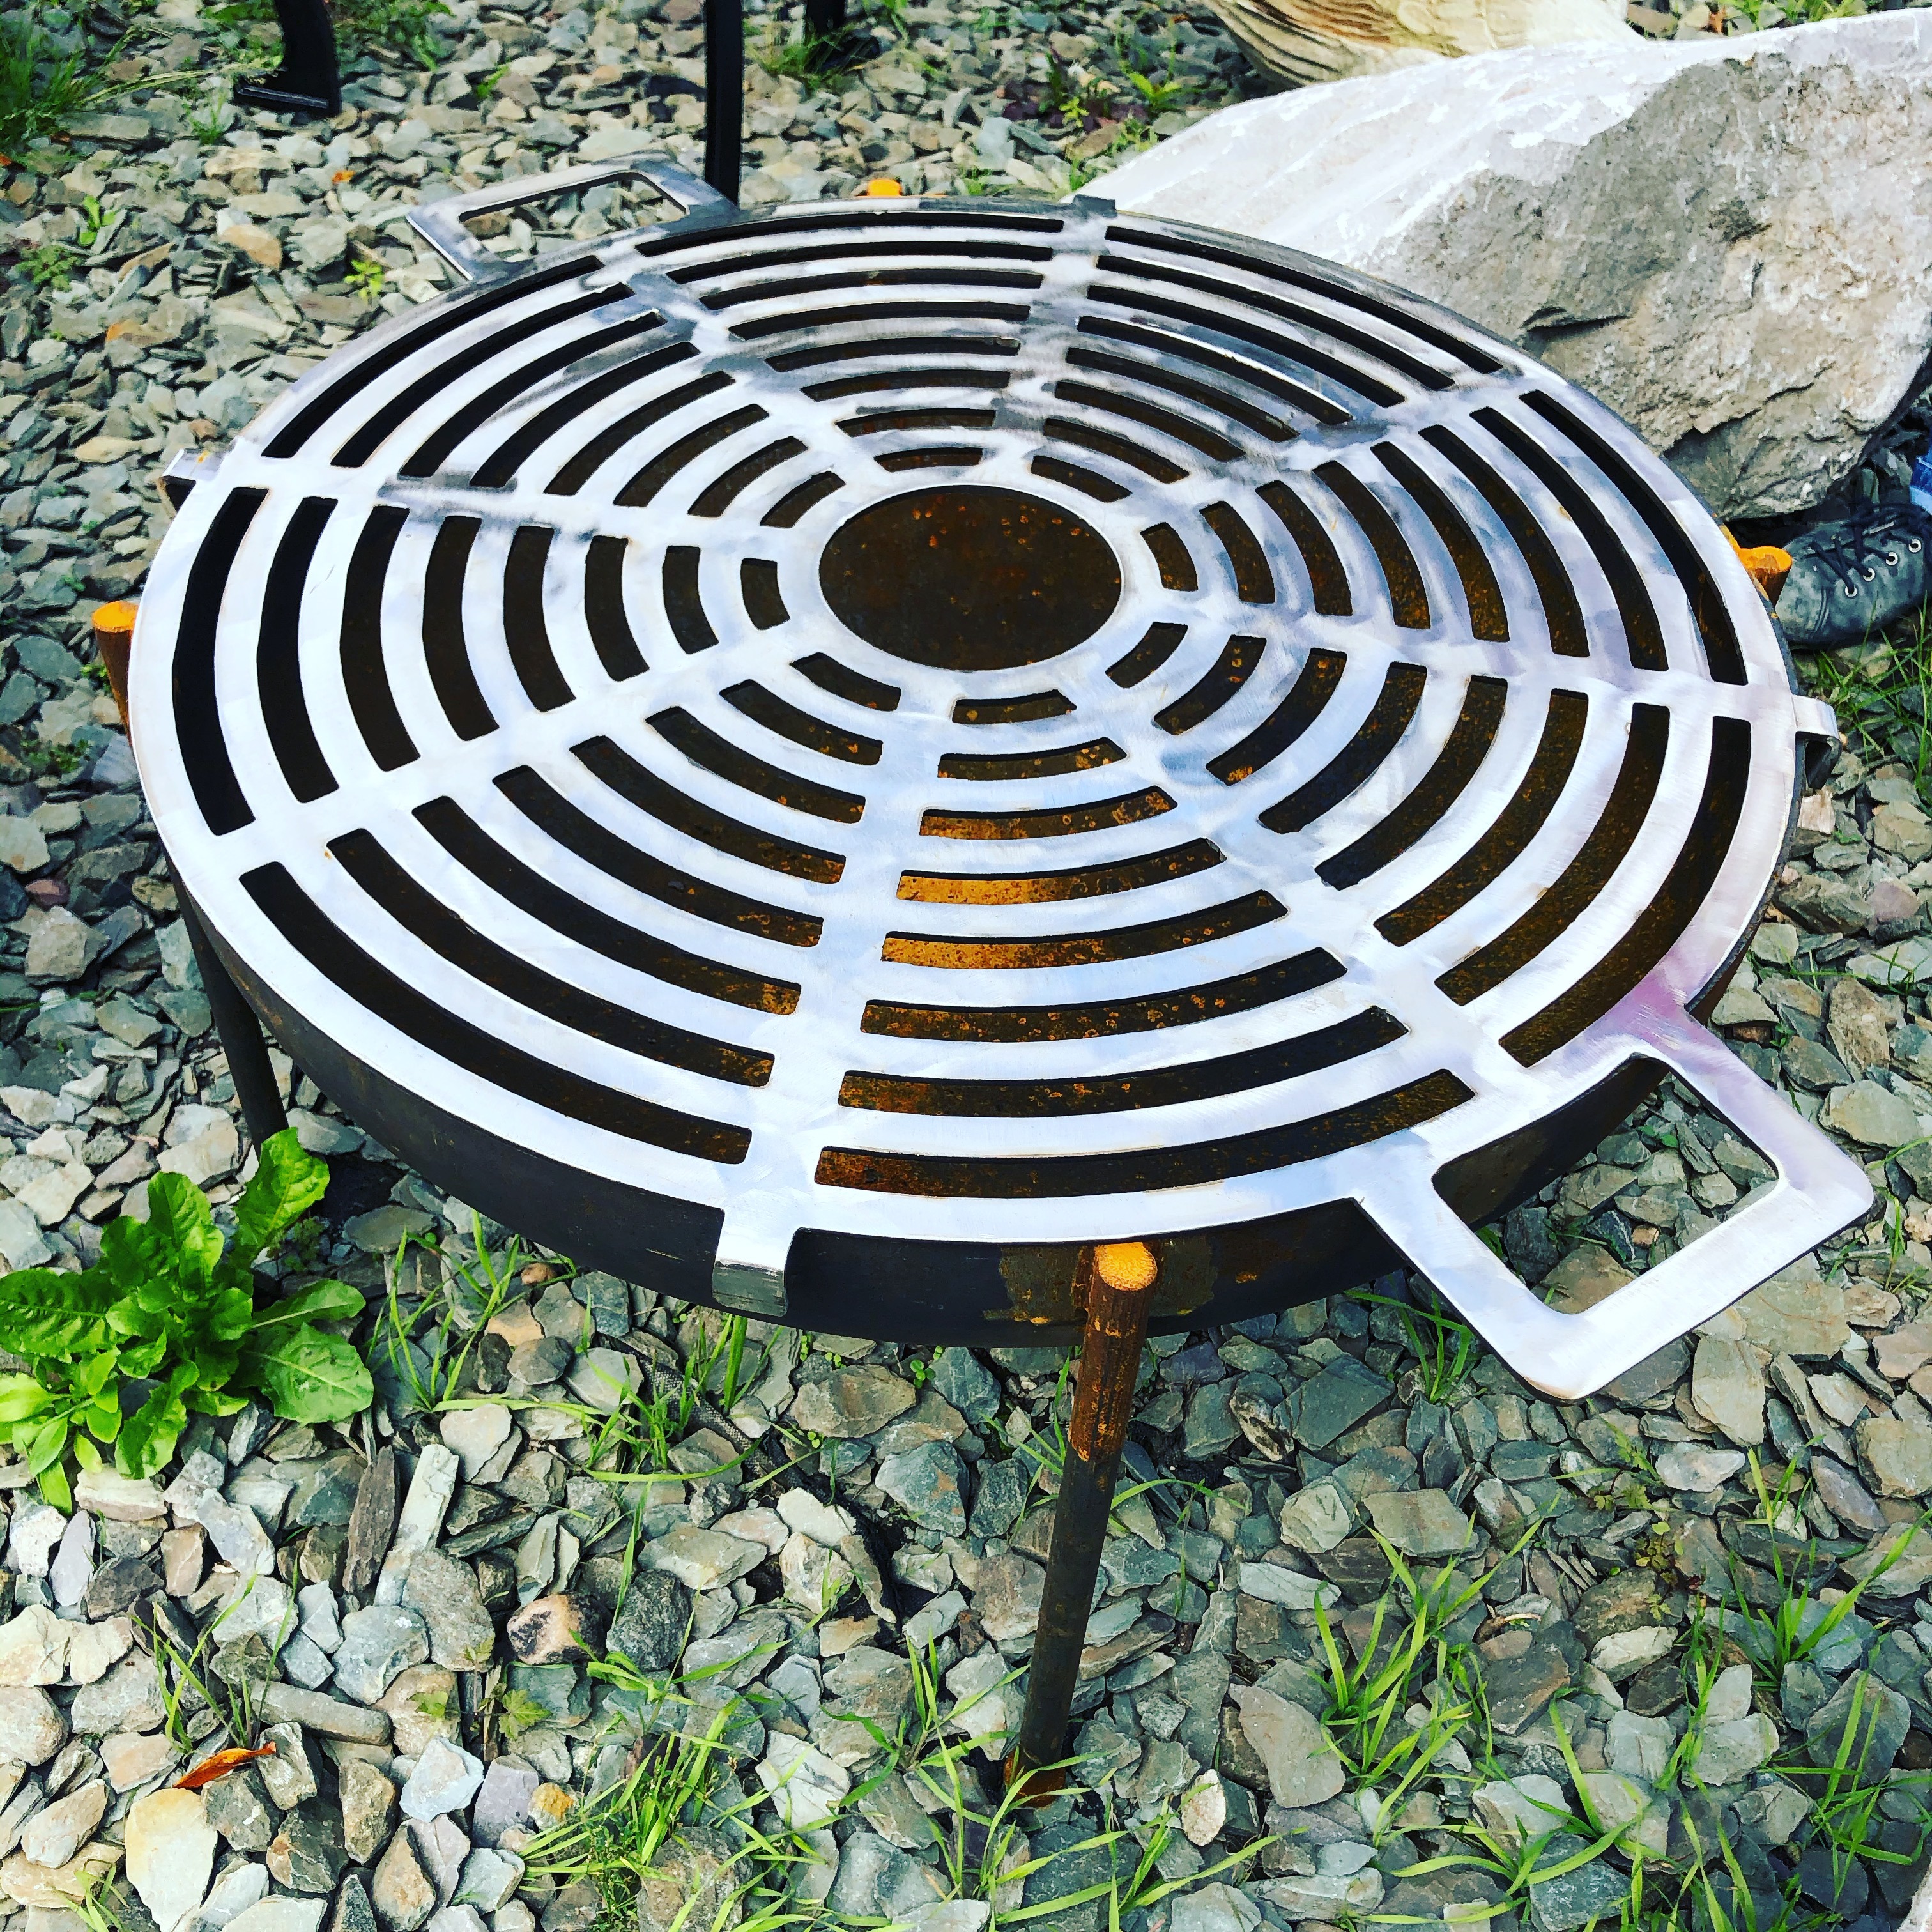 Stainless Steel Cooking Grill, Large Grill Grates For Fire Pits